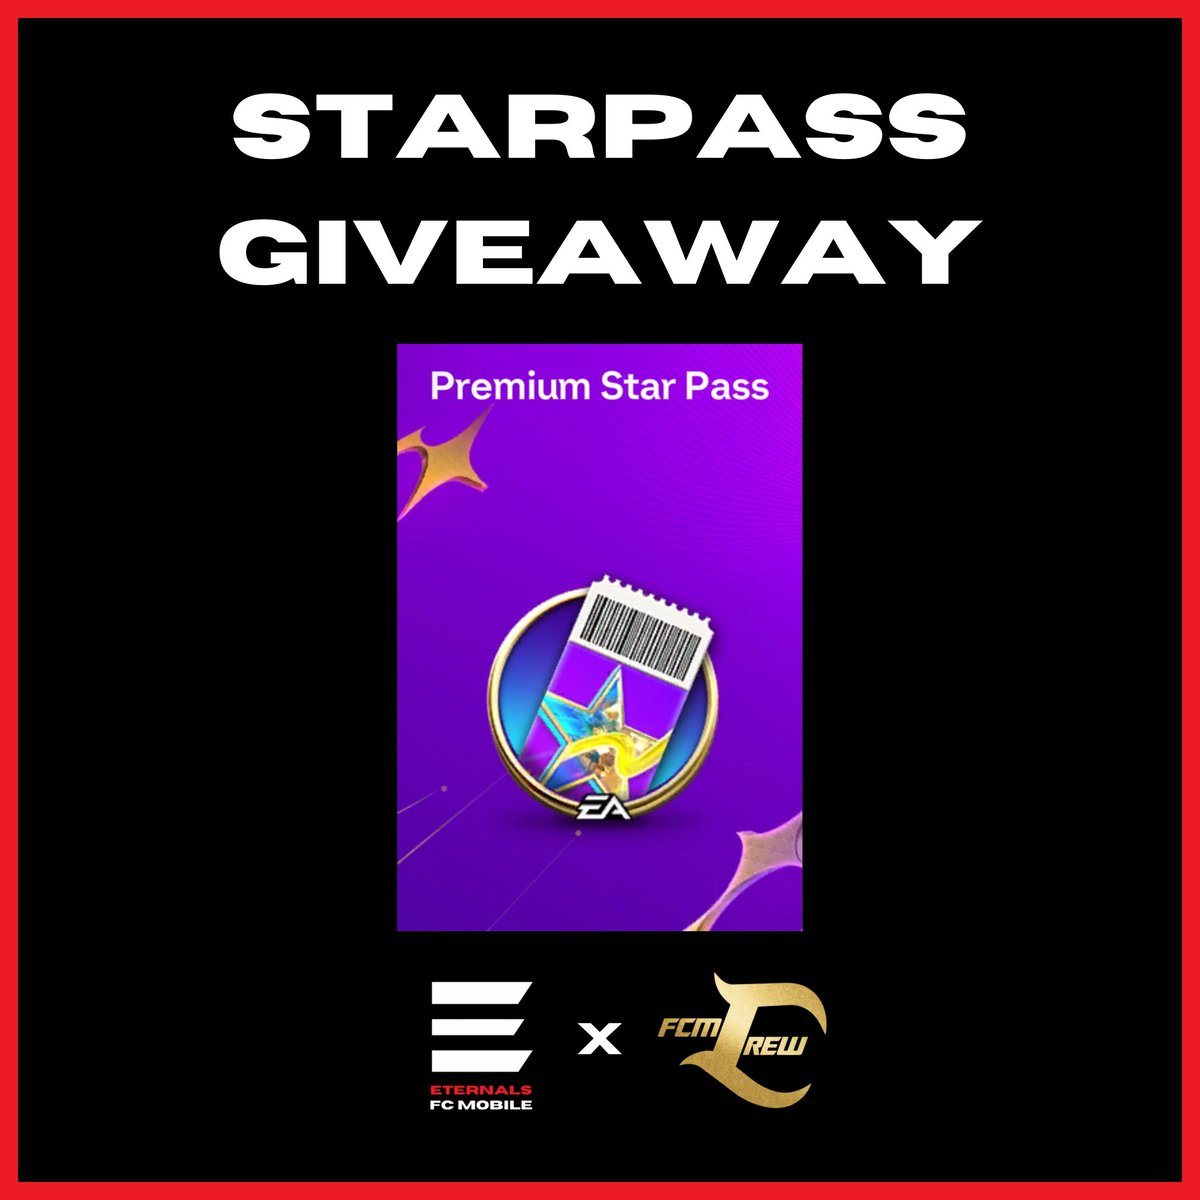 STARPASS GIVEAWAY 📣 in collaboration with @FCMobileCrew 🔥🔥 Requirements : 1. Like and Retweet ✅ 2. Follow @FCMobileCrew & @EternalsFCM 3. Post screenshots below ⬇️ Winners to be announced this weekend 😄🏆